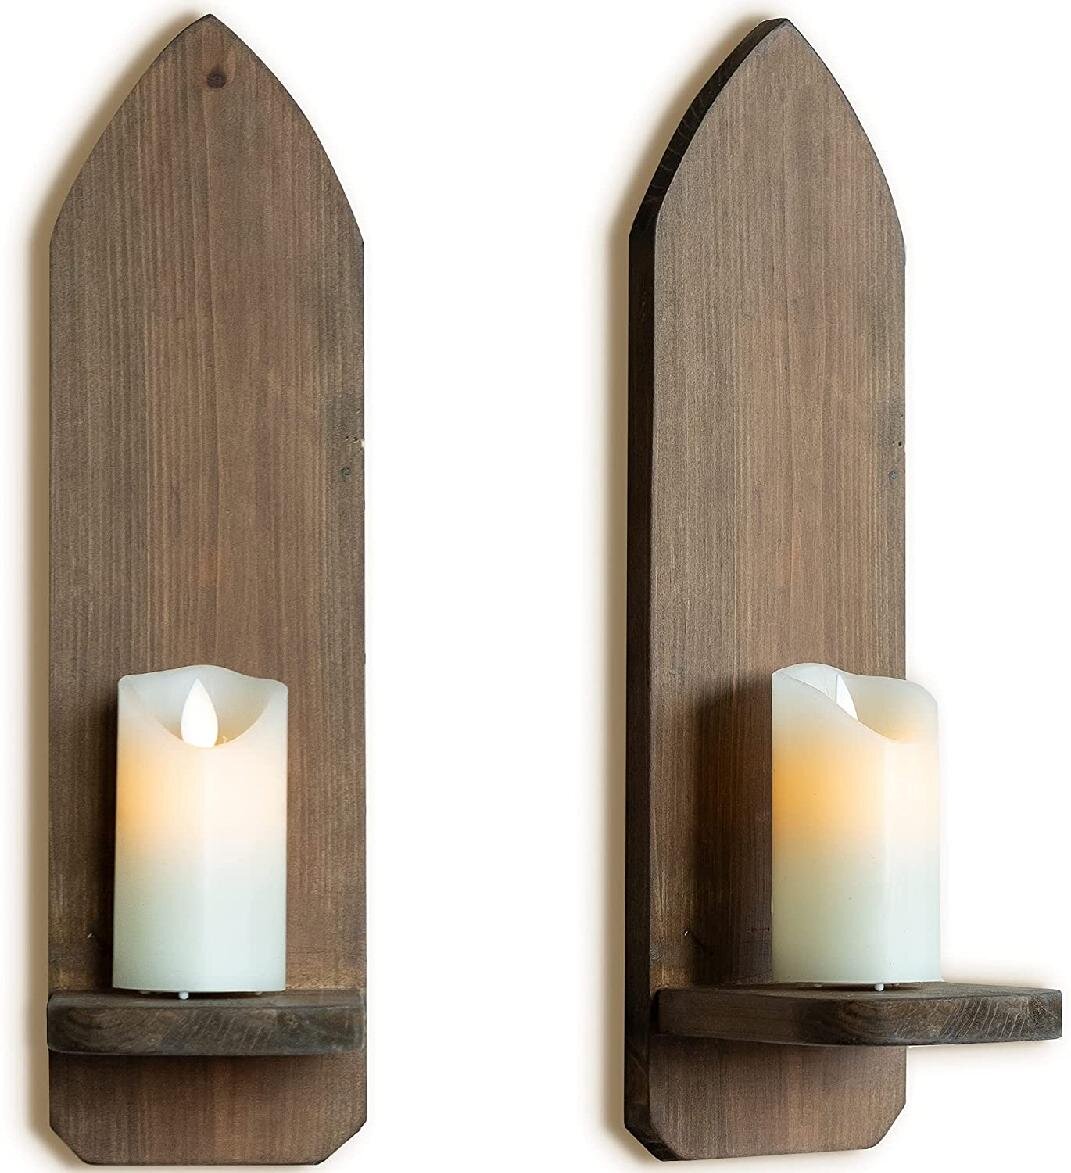 set of 2 Vintage tall mirrored plastic and brass colored metal wall sconce candle holder Home interiors